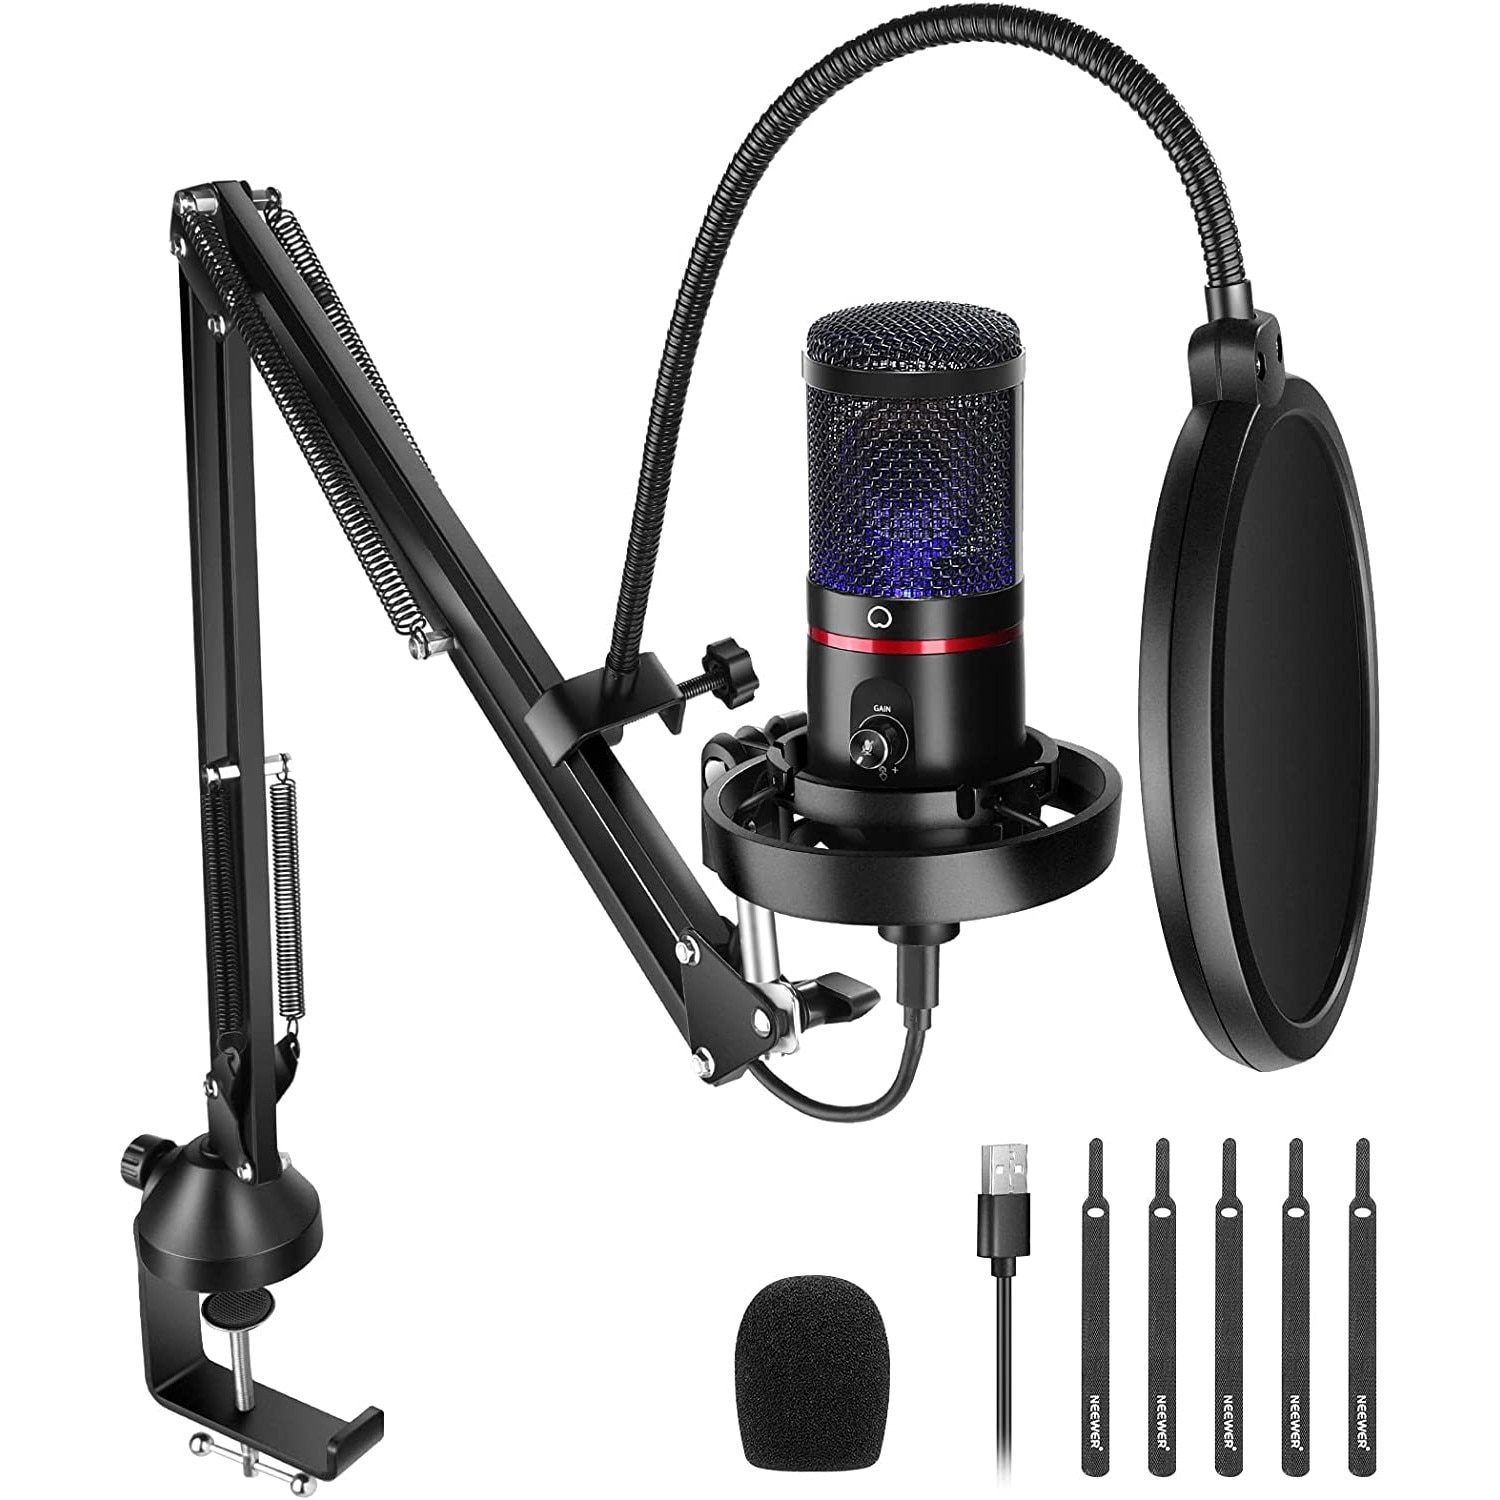 Clancy Mysterious Picasso Set microfon profesional gaming, cardioid, plug and play, buton mute si  gain control, LED, cu stand brat cu menghina si filtru pop, pentru PC,  streaming online, Twitch, Podcast, Neewer CM20 - eMAG.ro